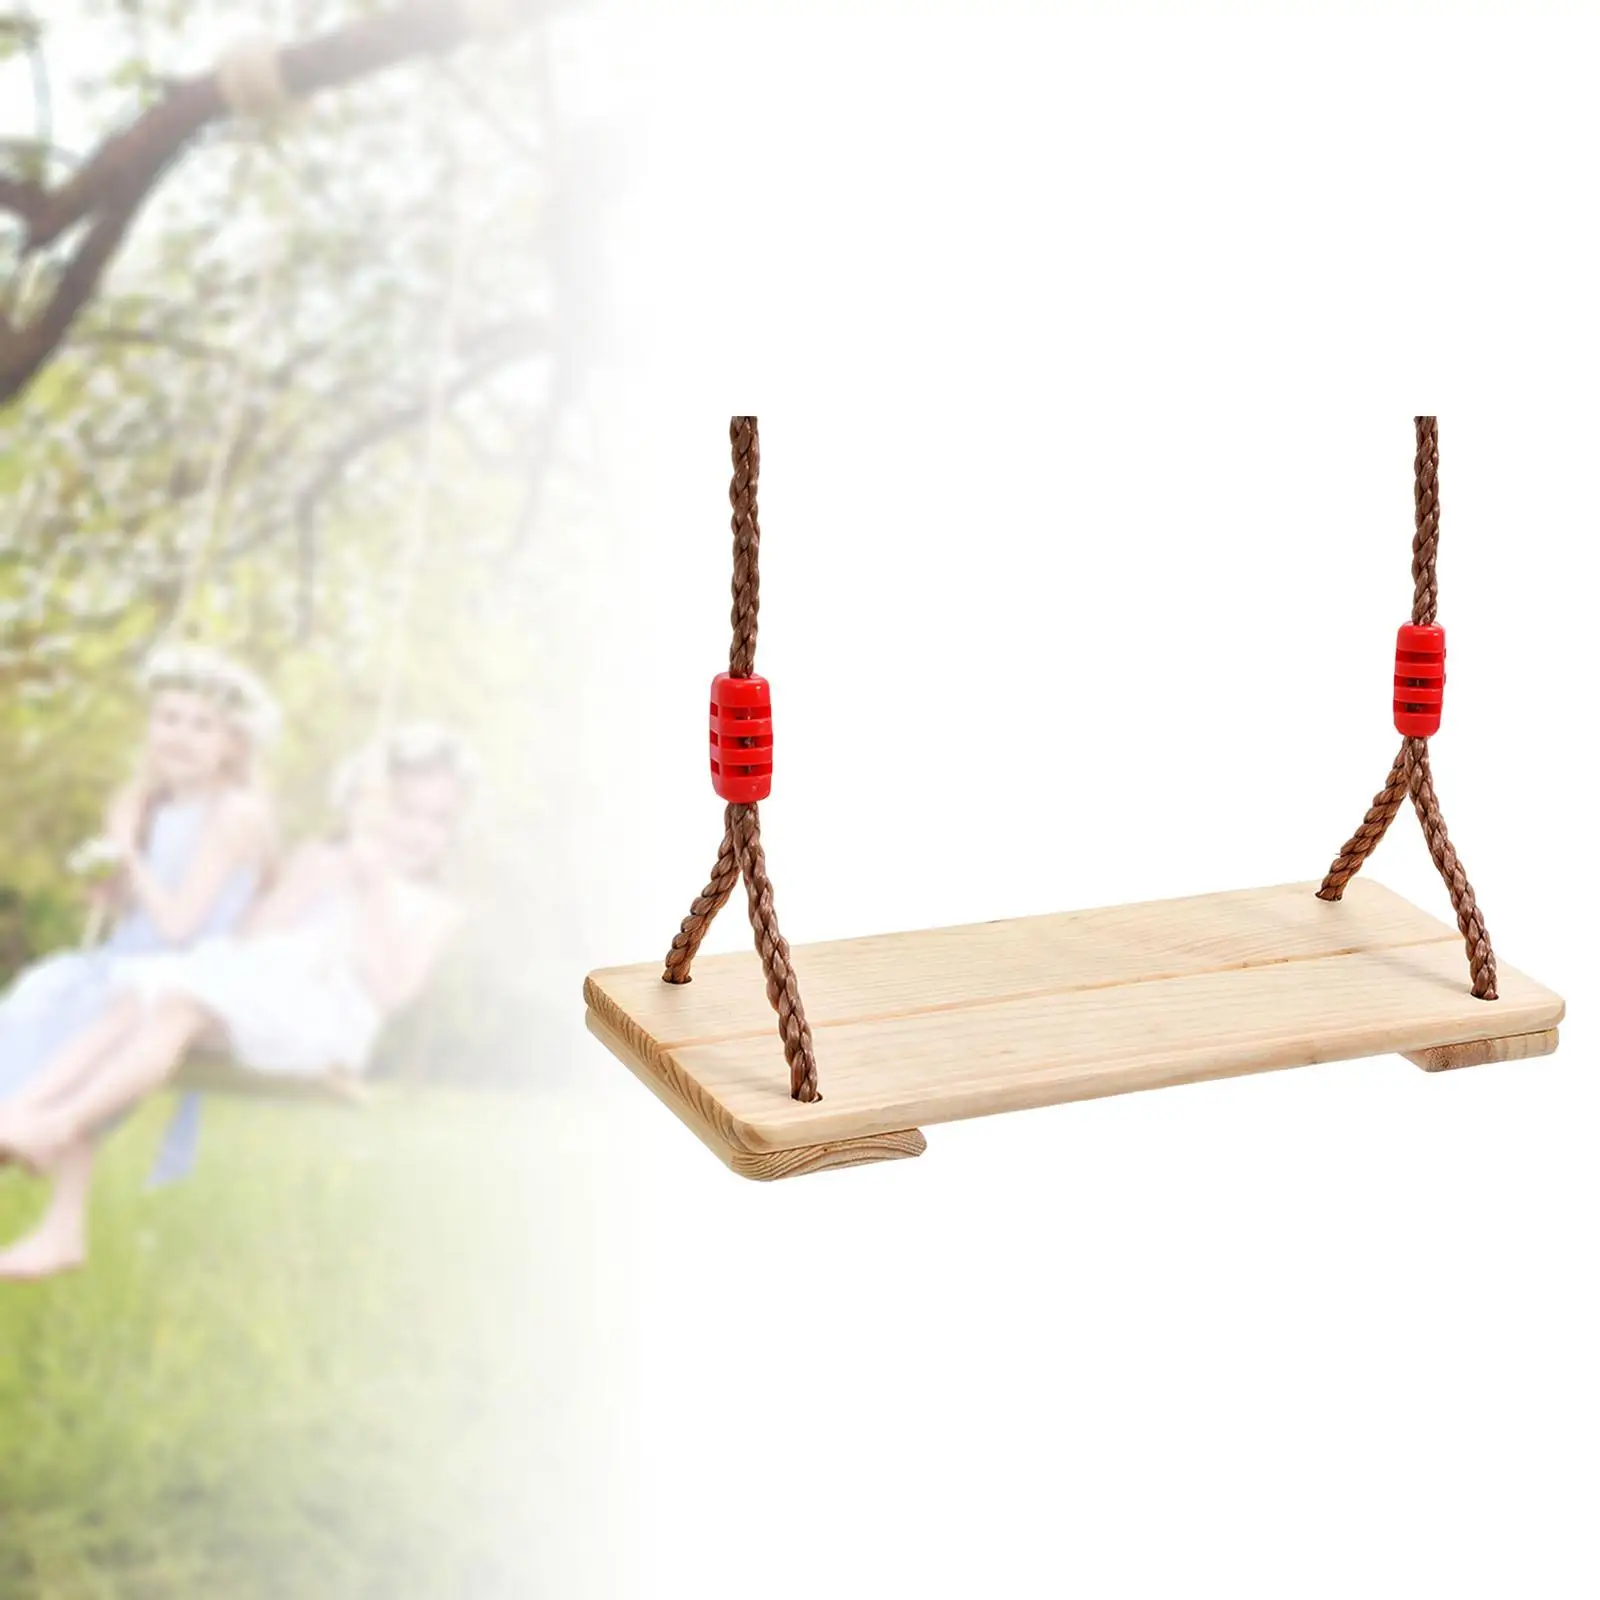 Kids Wooden Swings Garden Swing Seat Chair Toddler Toys with Rope Durable Baby Hanging Swing for Playground Backyard Garden Yard